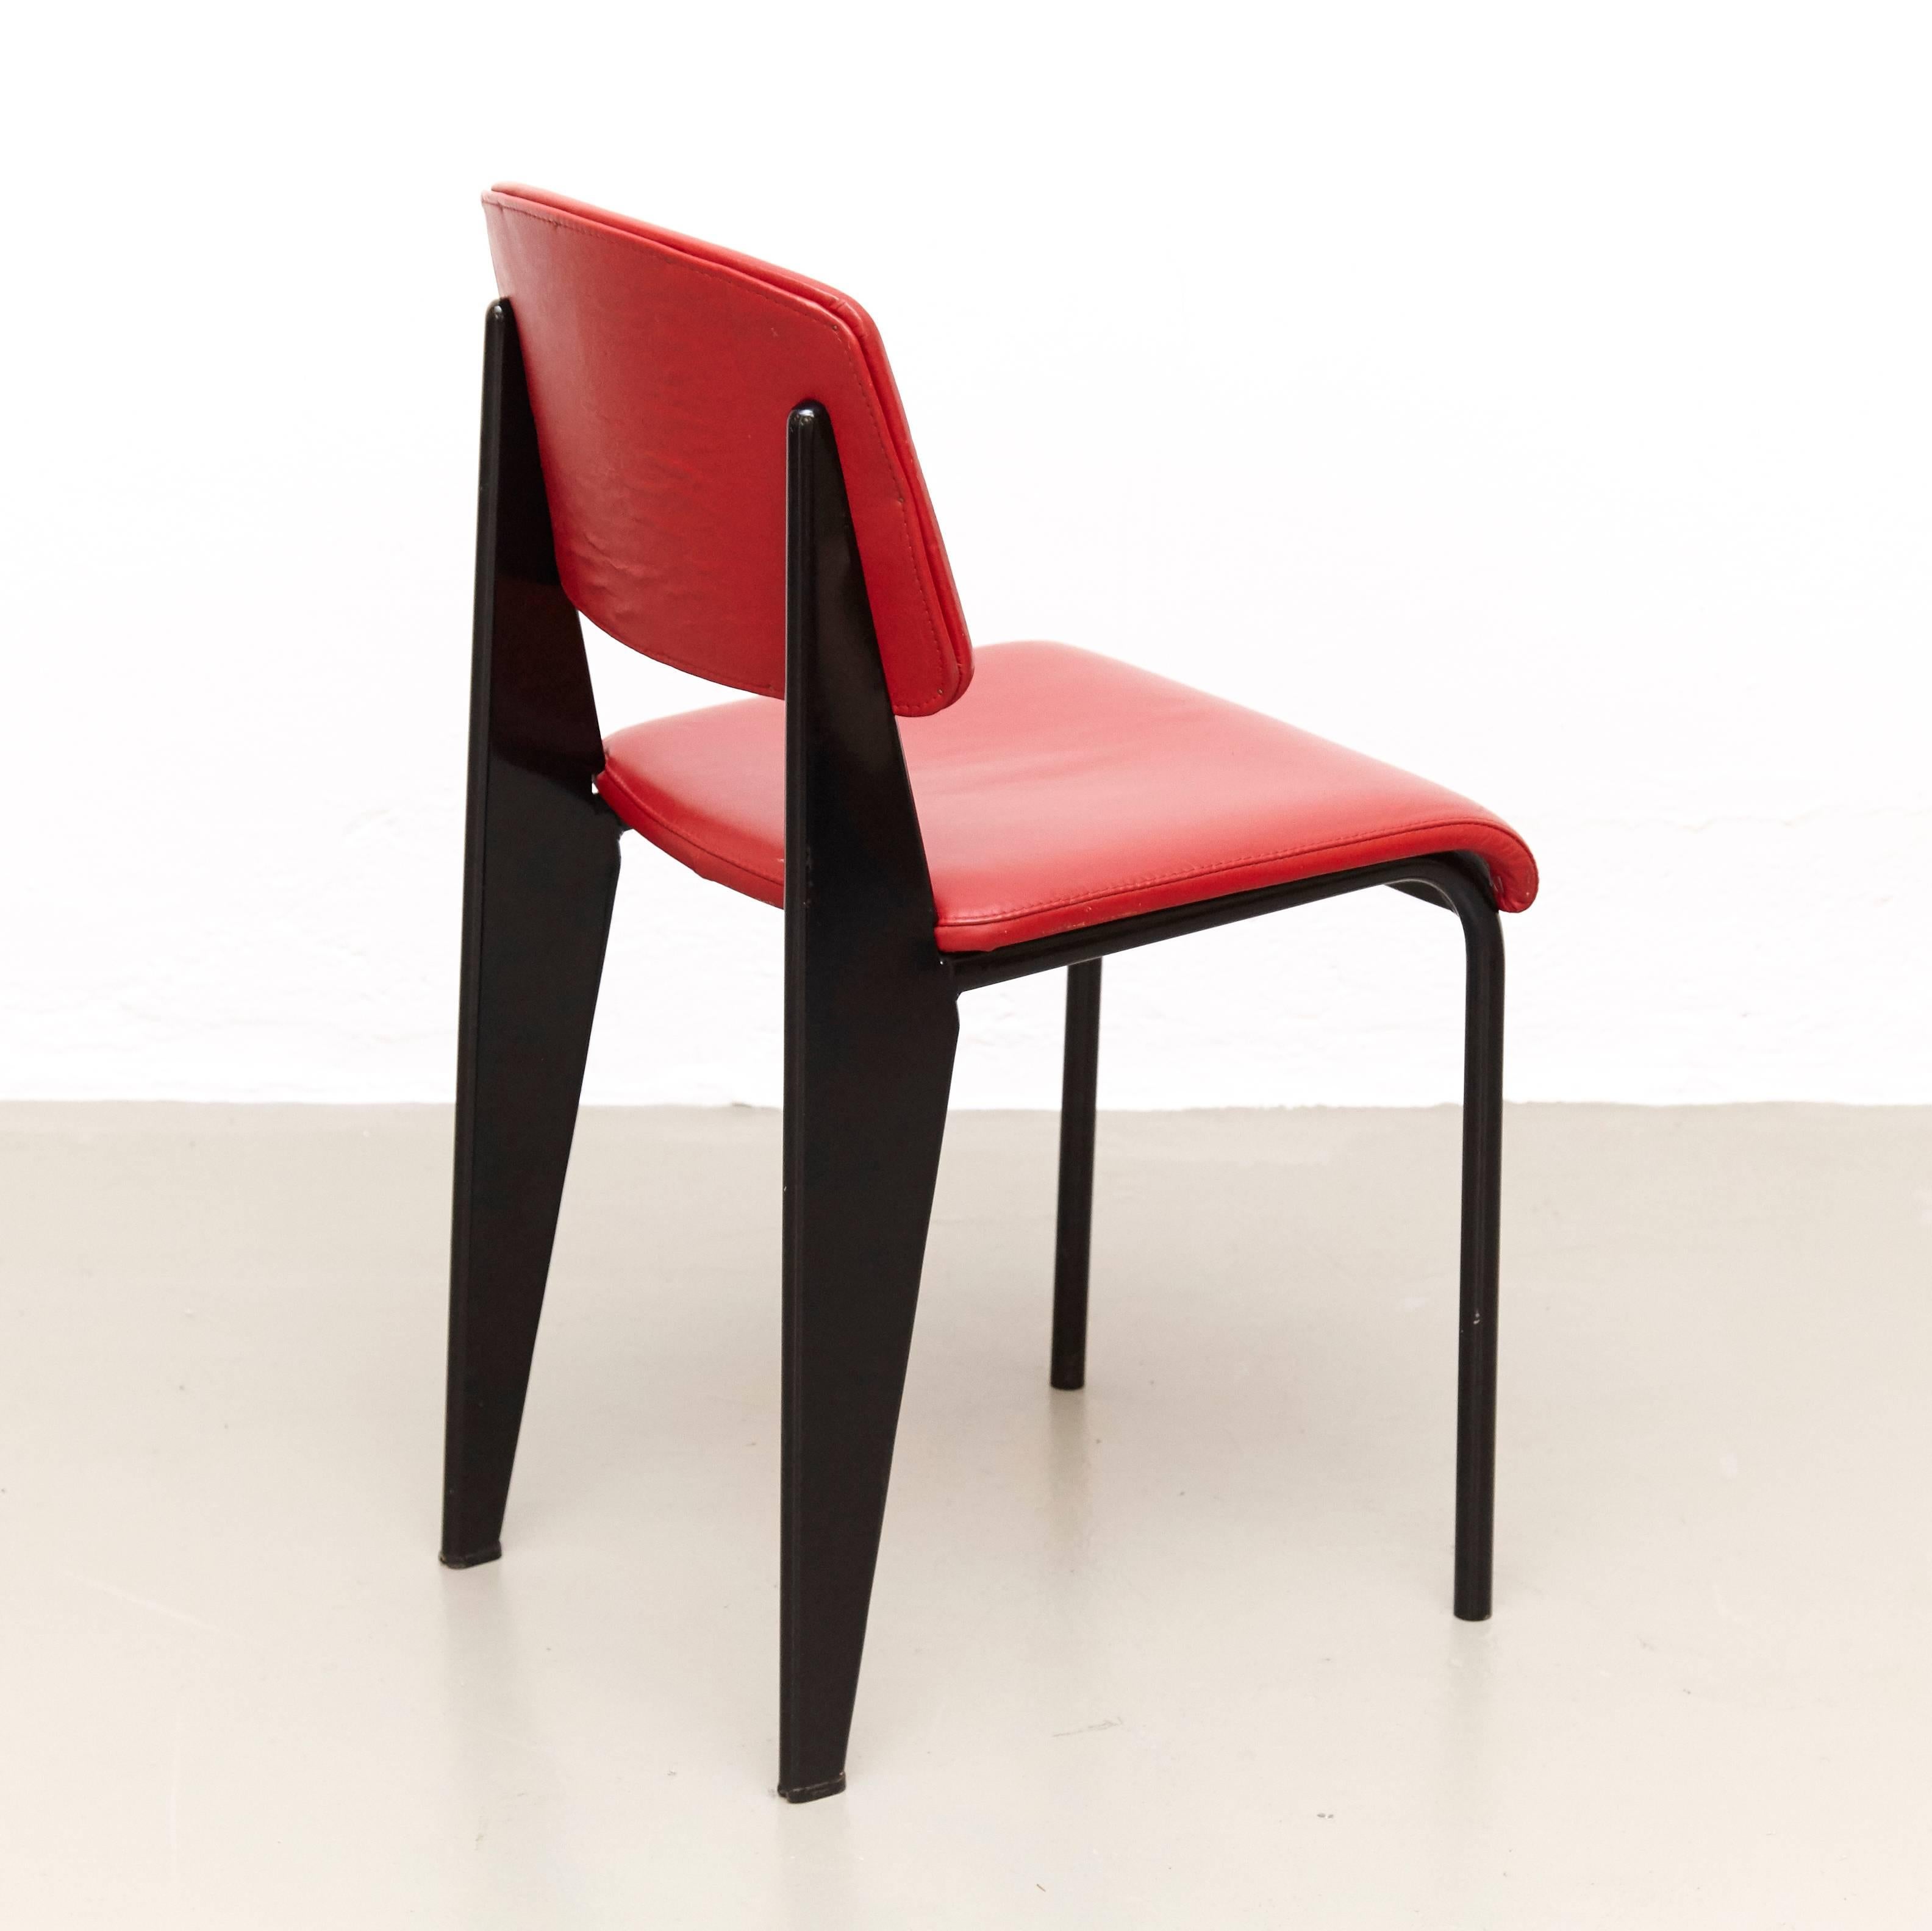 Mid-Century Modern Jean Prouvé Mid Century Modern Red Upholstered Standard Chair, circa 1950